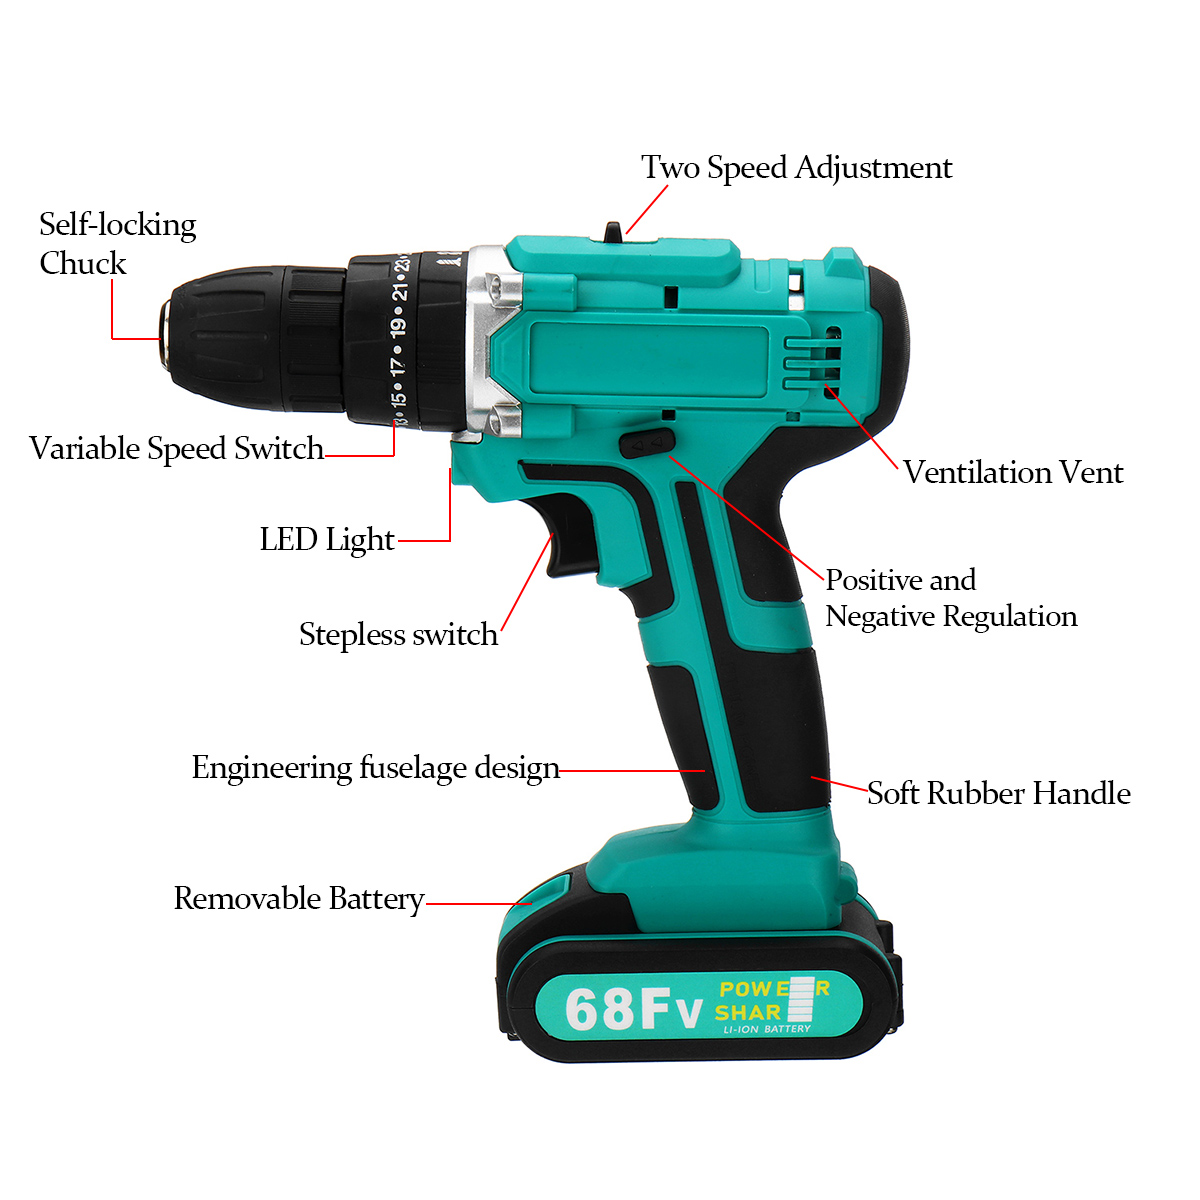 68FV-Household-Lithium-Electric-Screwdriver-2-Speed-Impact-Power-Drills-Rechargeable-Drill-Driver-W--1560586-6